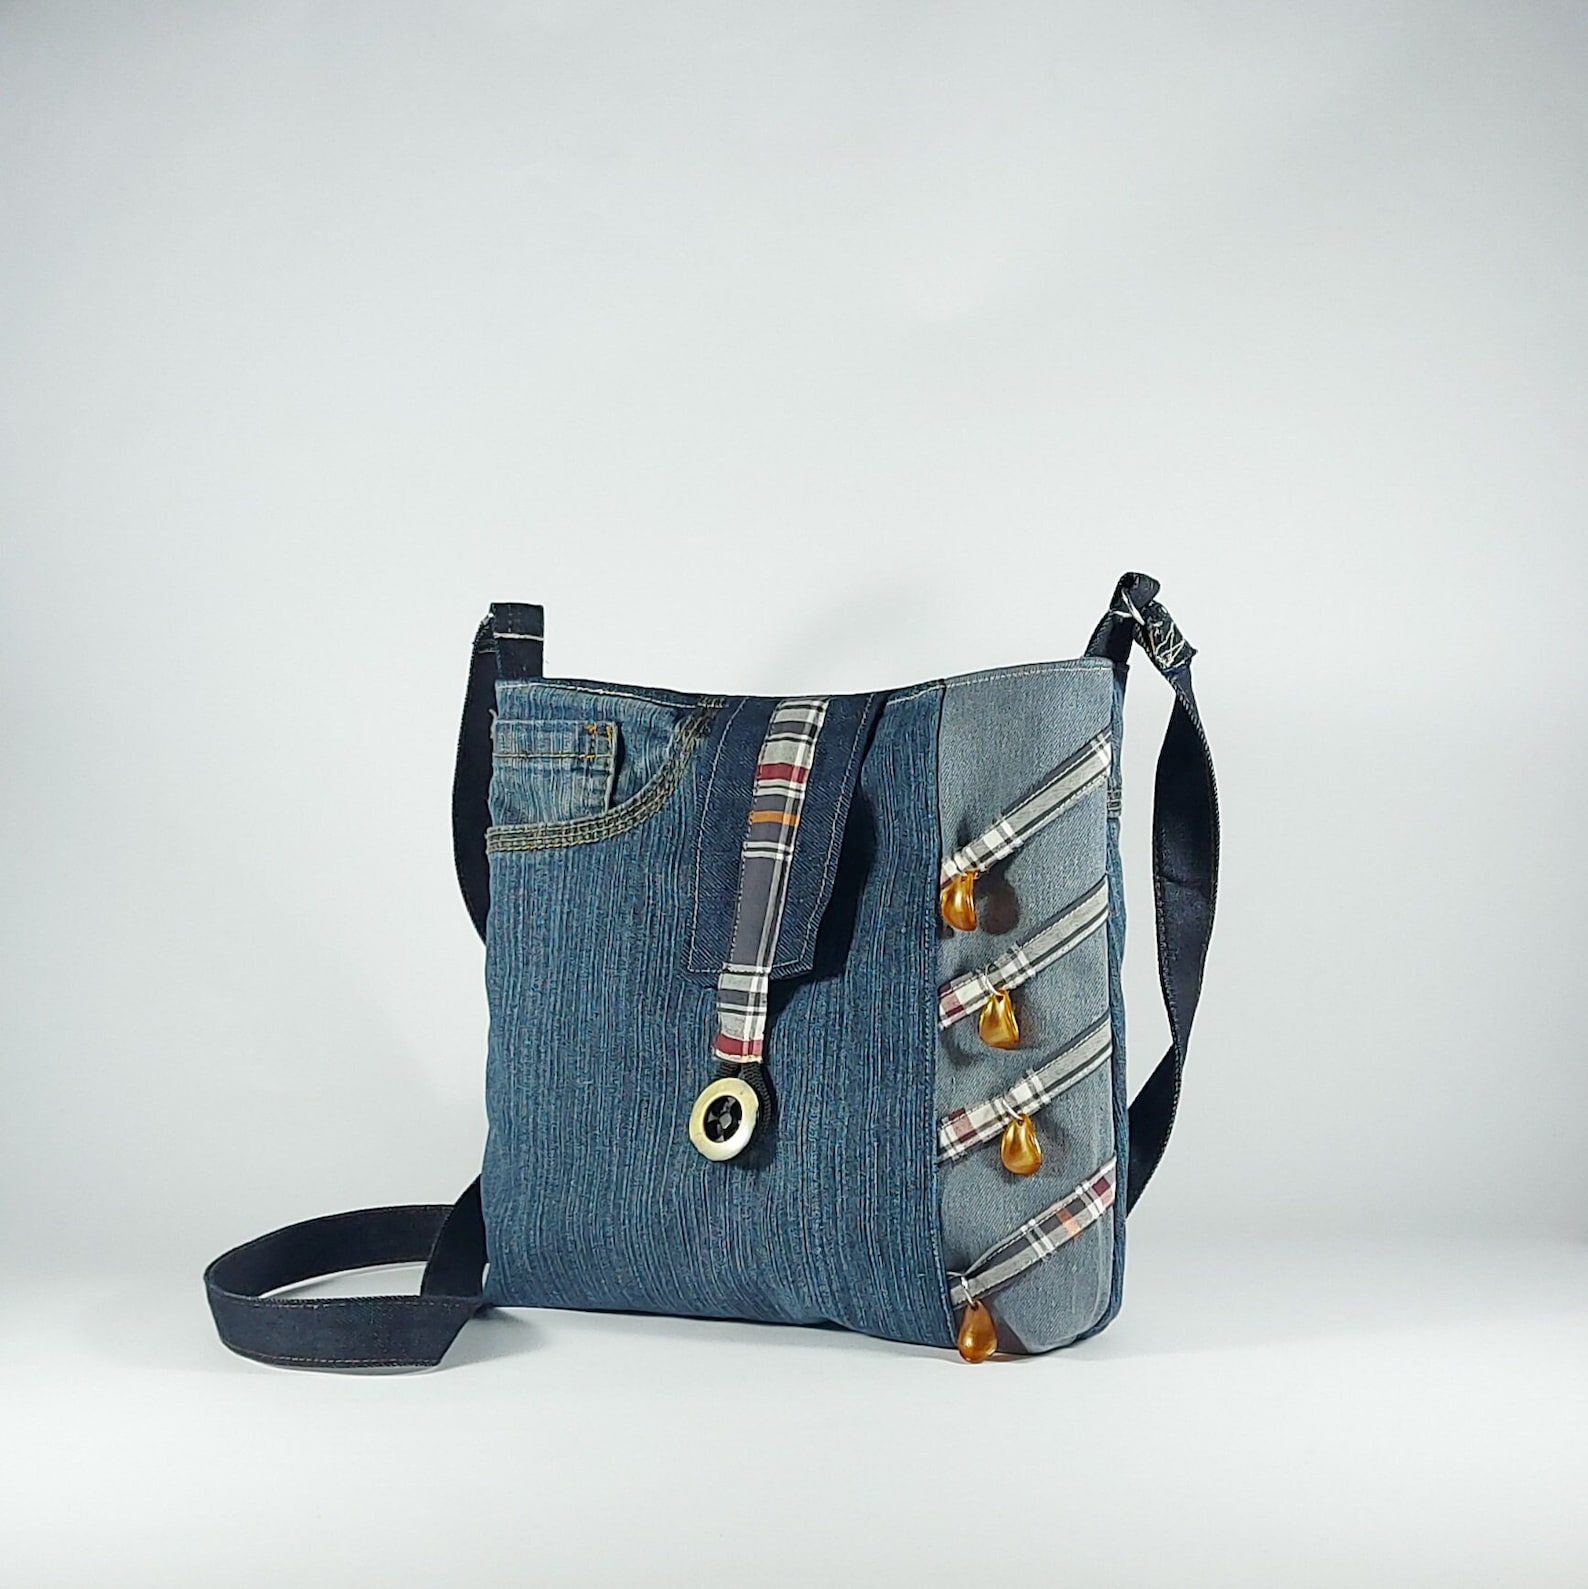 Cute Mini Patchwork Jeans Crossbody Bag With an Adjustable Cross Body ...